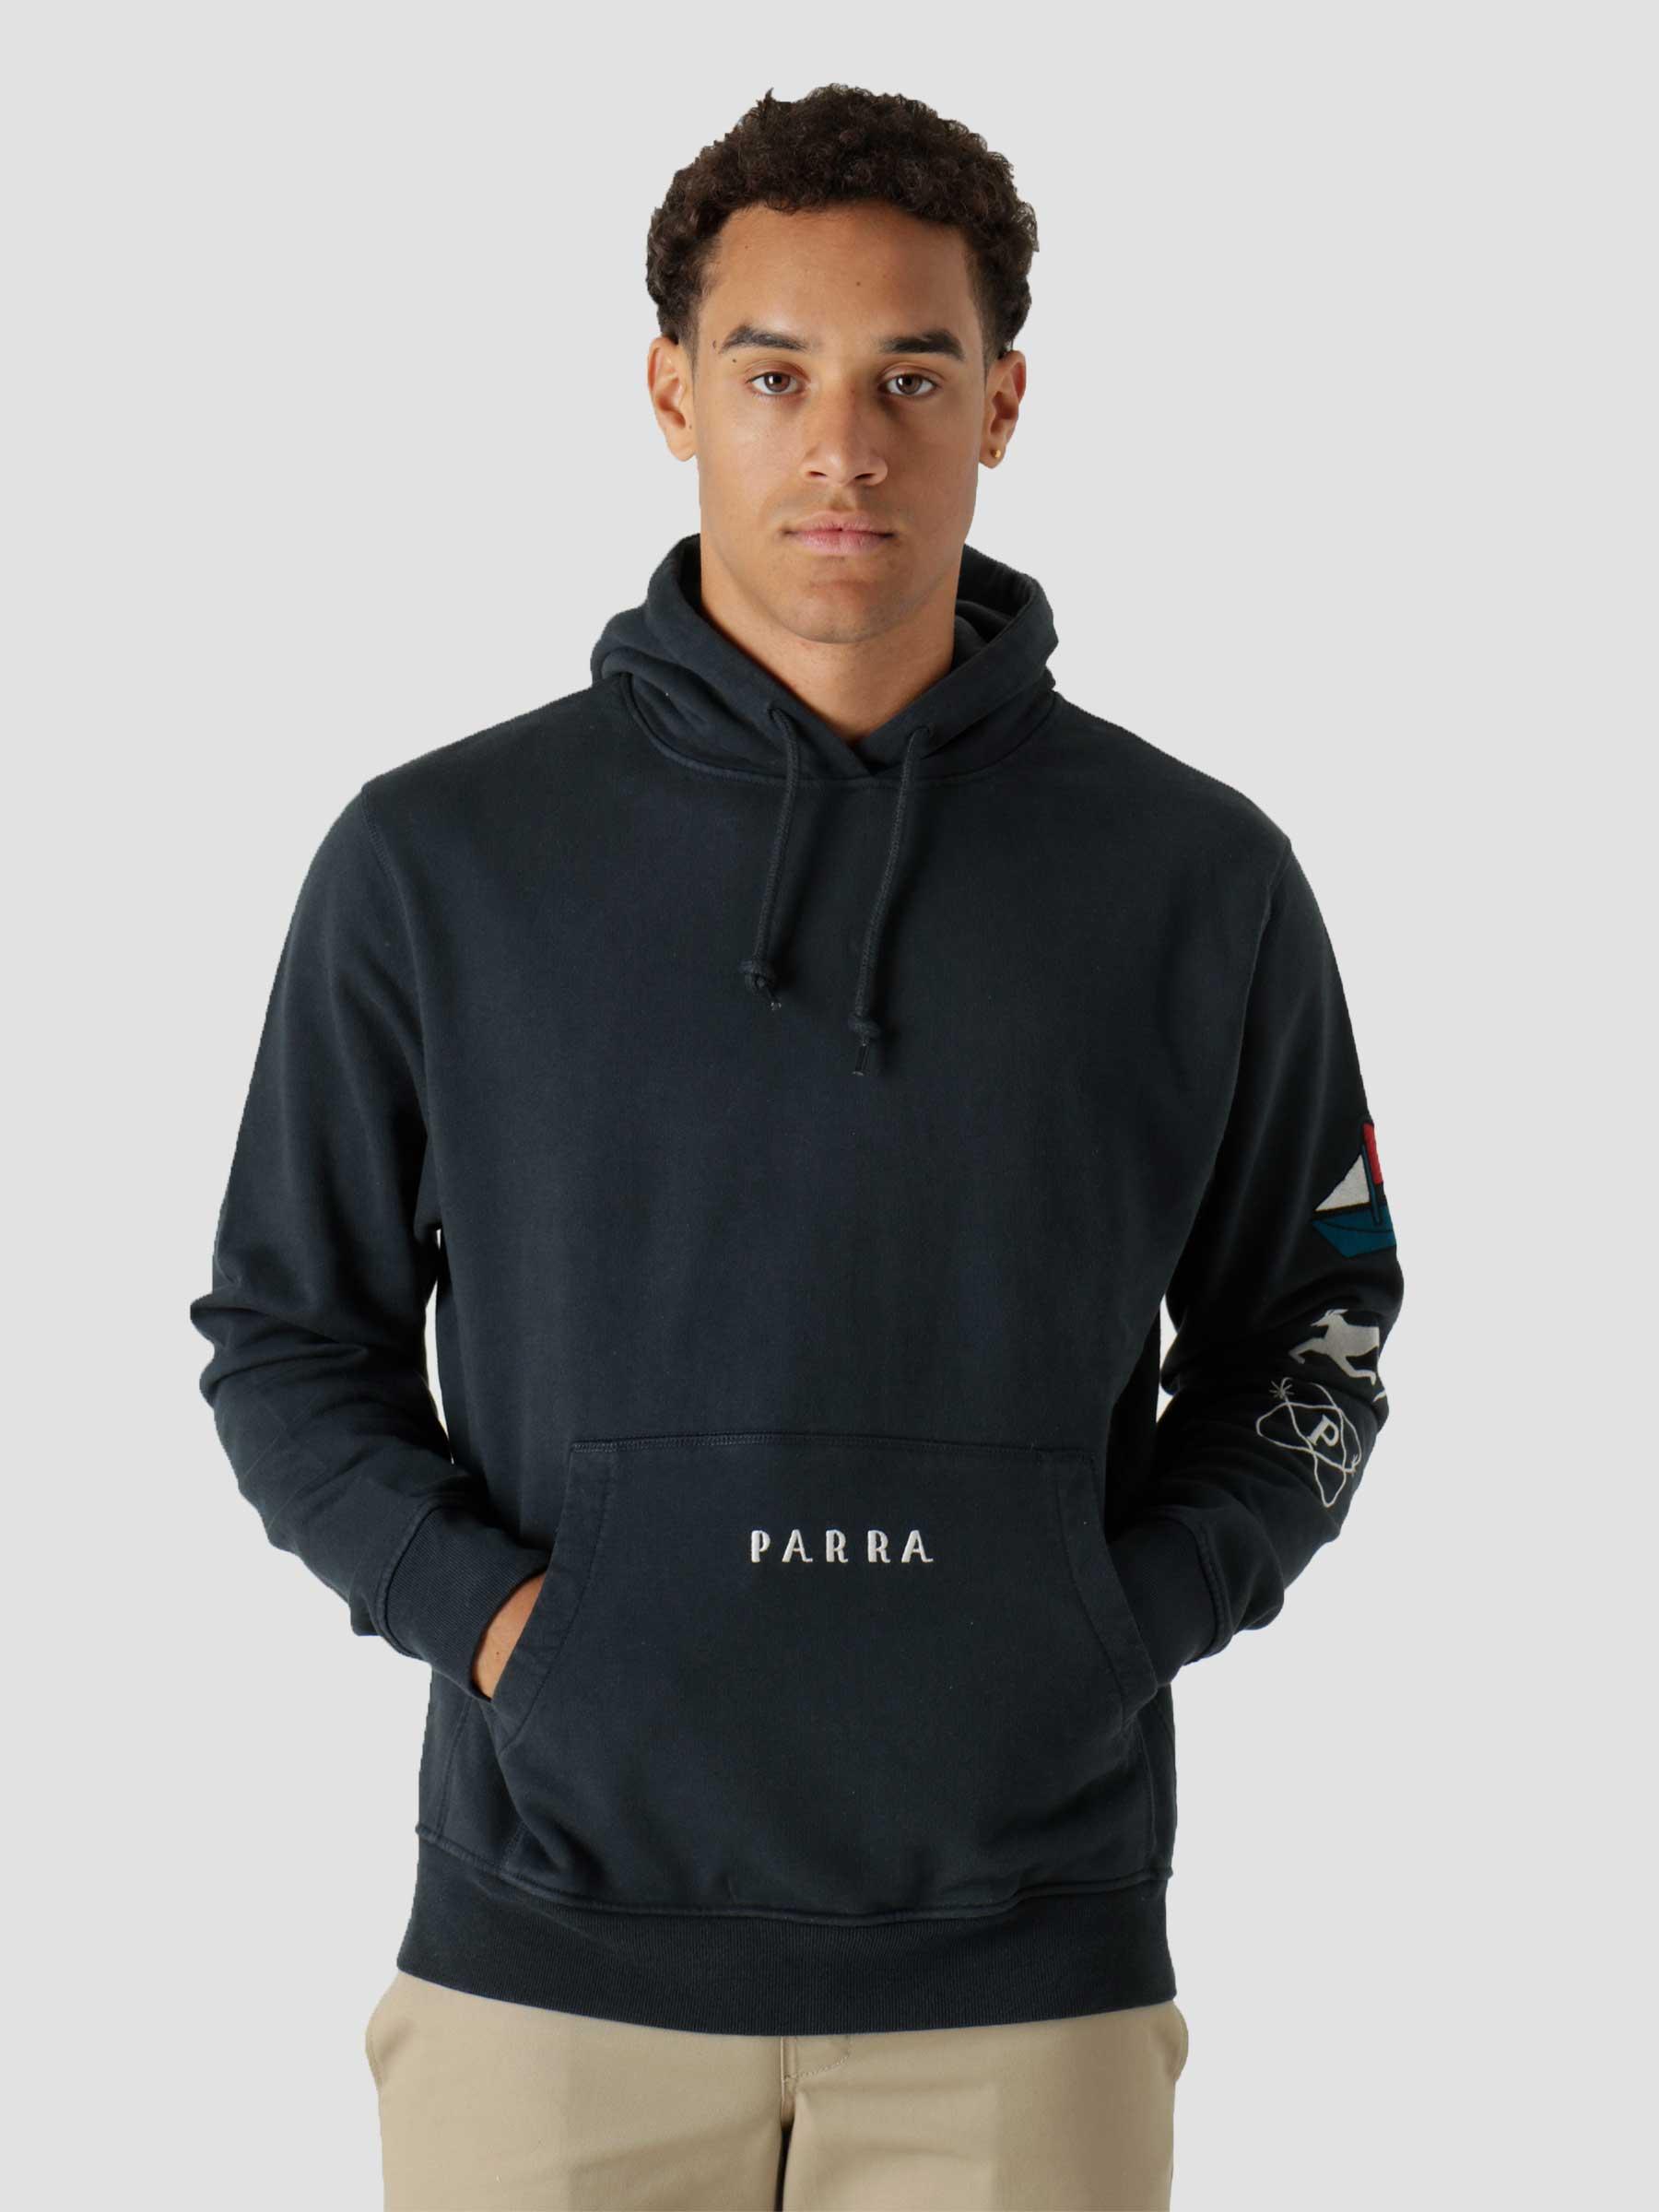 Paper Dog Systems Hooded Sweatshirt Navy Blue 46235